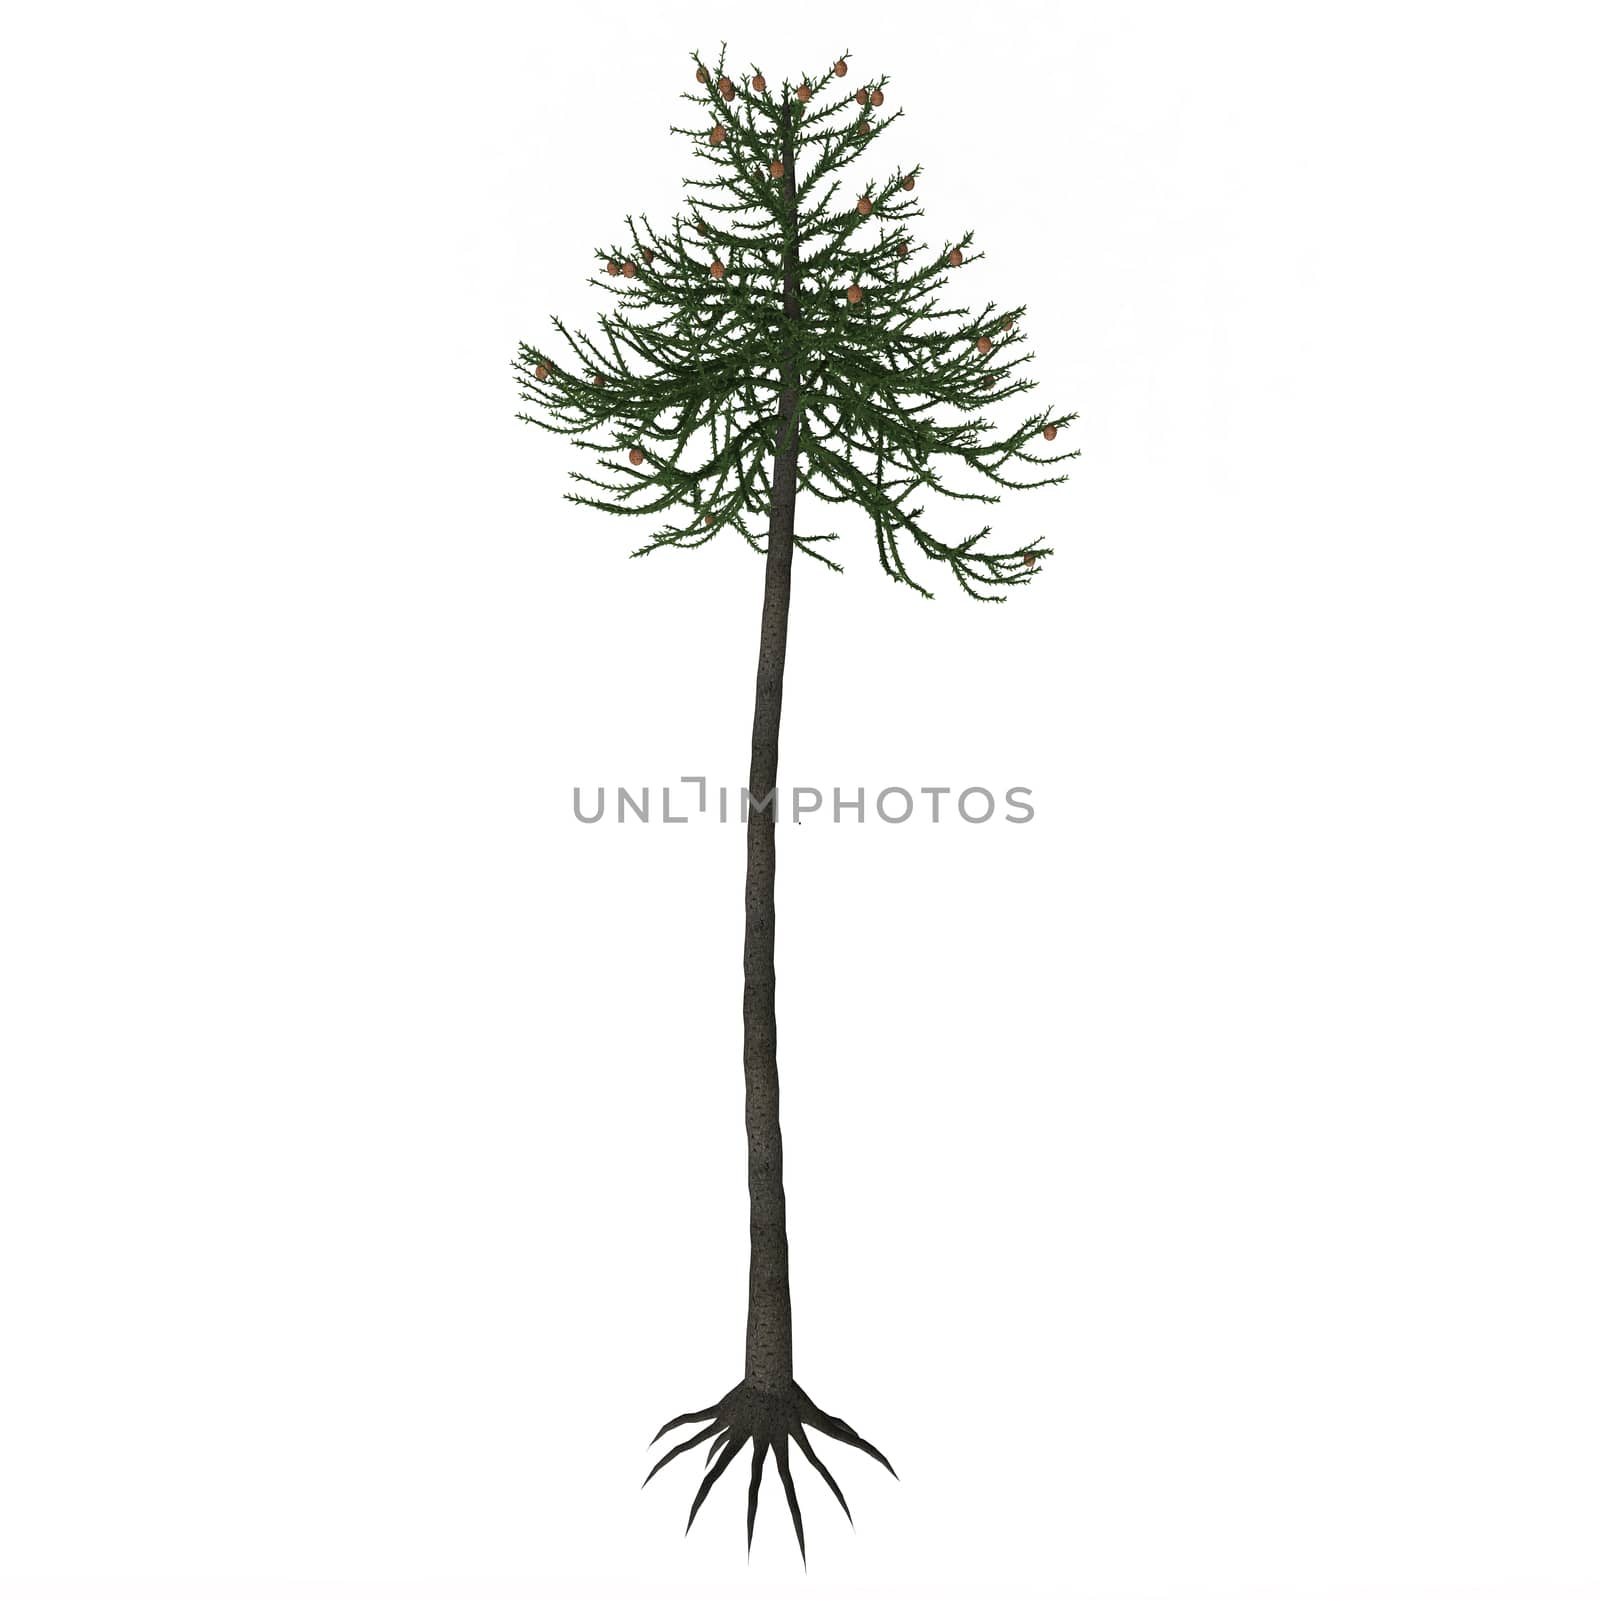  Araucariaceae is a very successful early conifer order who appeared on Earth in the Triassic period and lasted until today with several living species (amongst which the most famous is the so-called Monkey puzzle tree). 